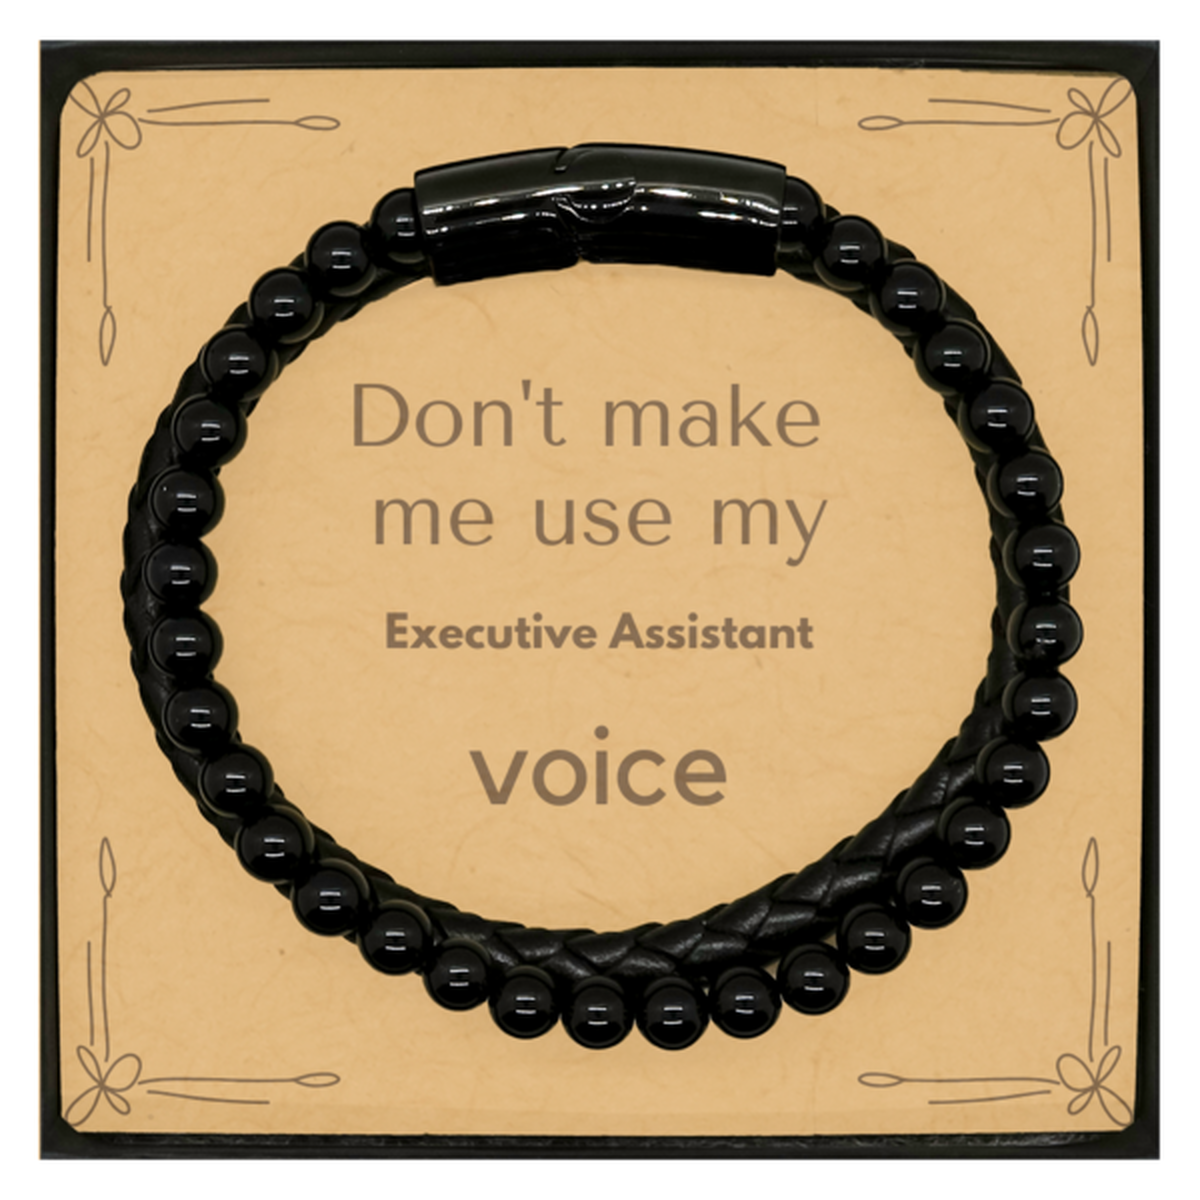 Don't make me use my Executive Assistant voice, Sarcasm Executive Assistant Card Gifts, Christmas Executive Assistant Stone Leather Bracelets Birthday Unique Gifts For Executive Assistant Coworkers, Men, Women, Colleague, Friends